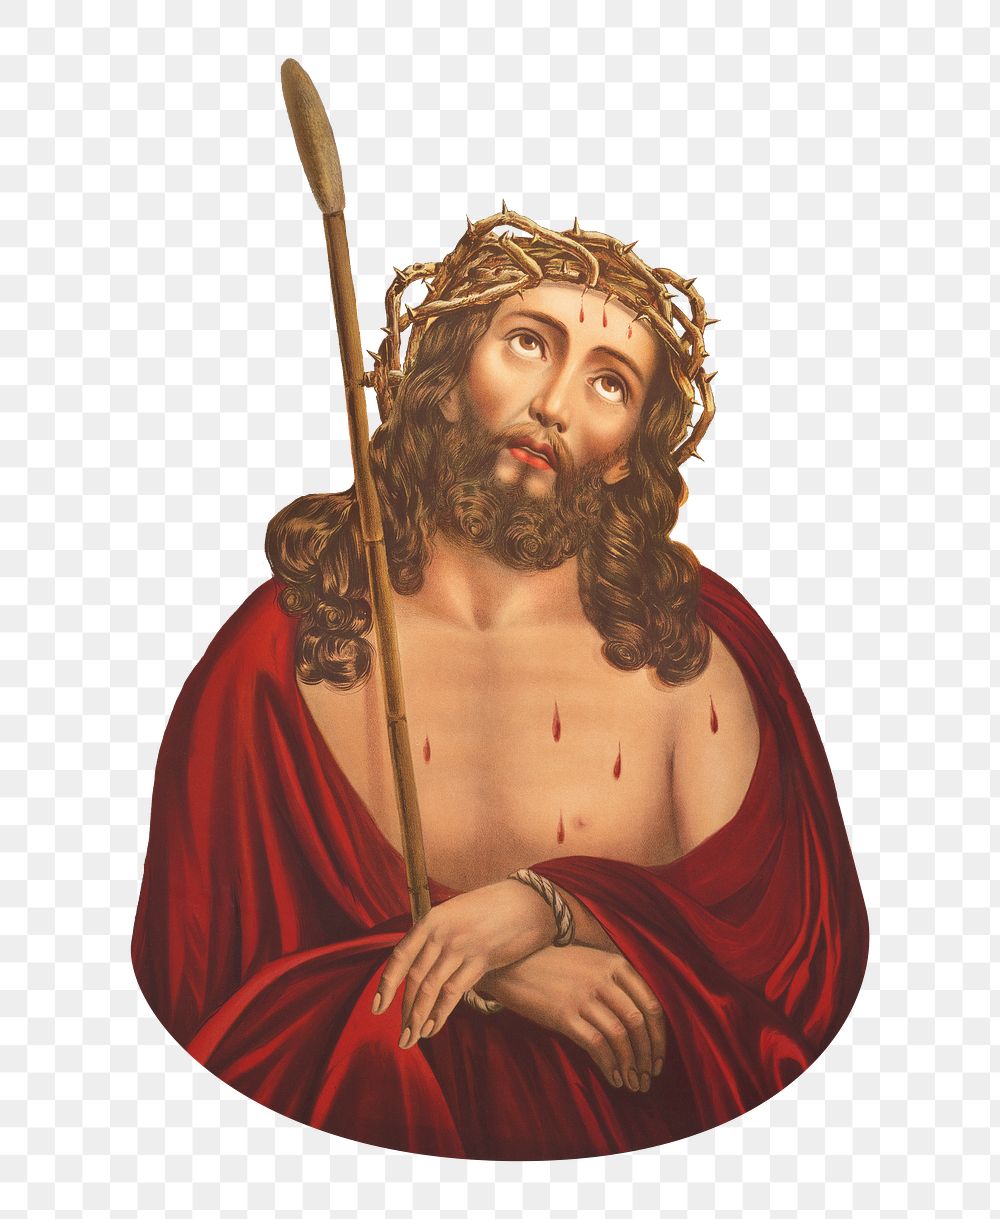 Jesus Christ png crown of thorns, vintage illustration, transparent background. Remixed by rawpixel.